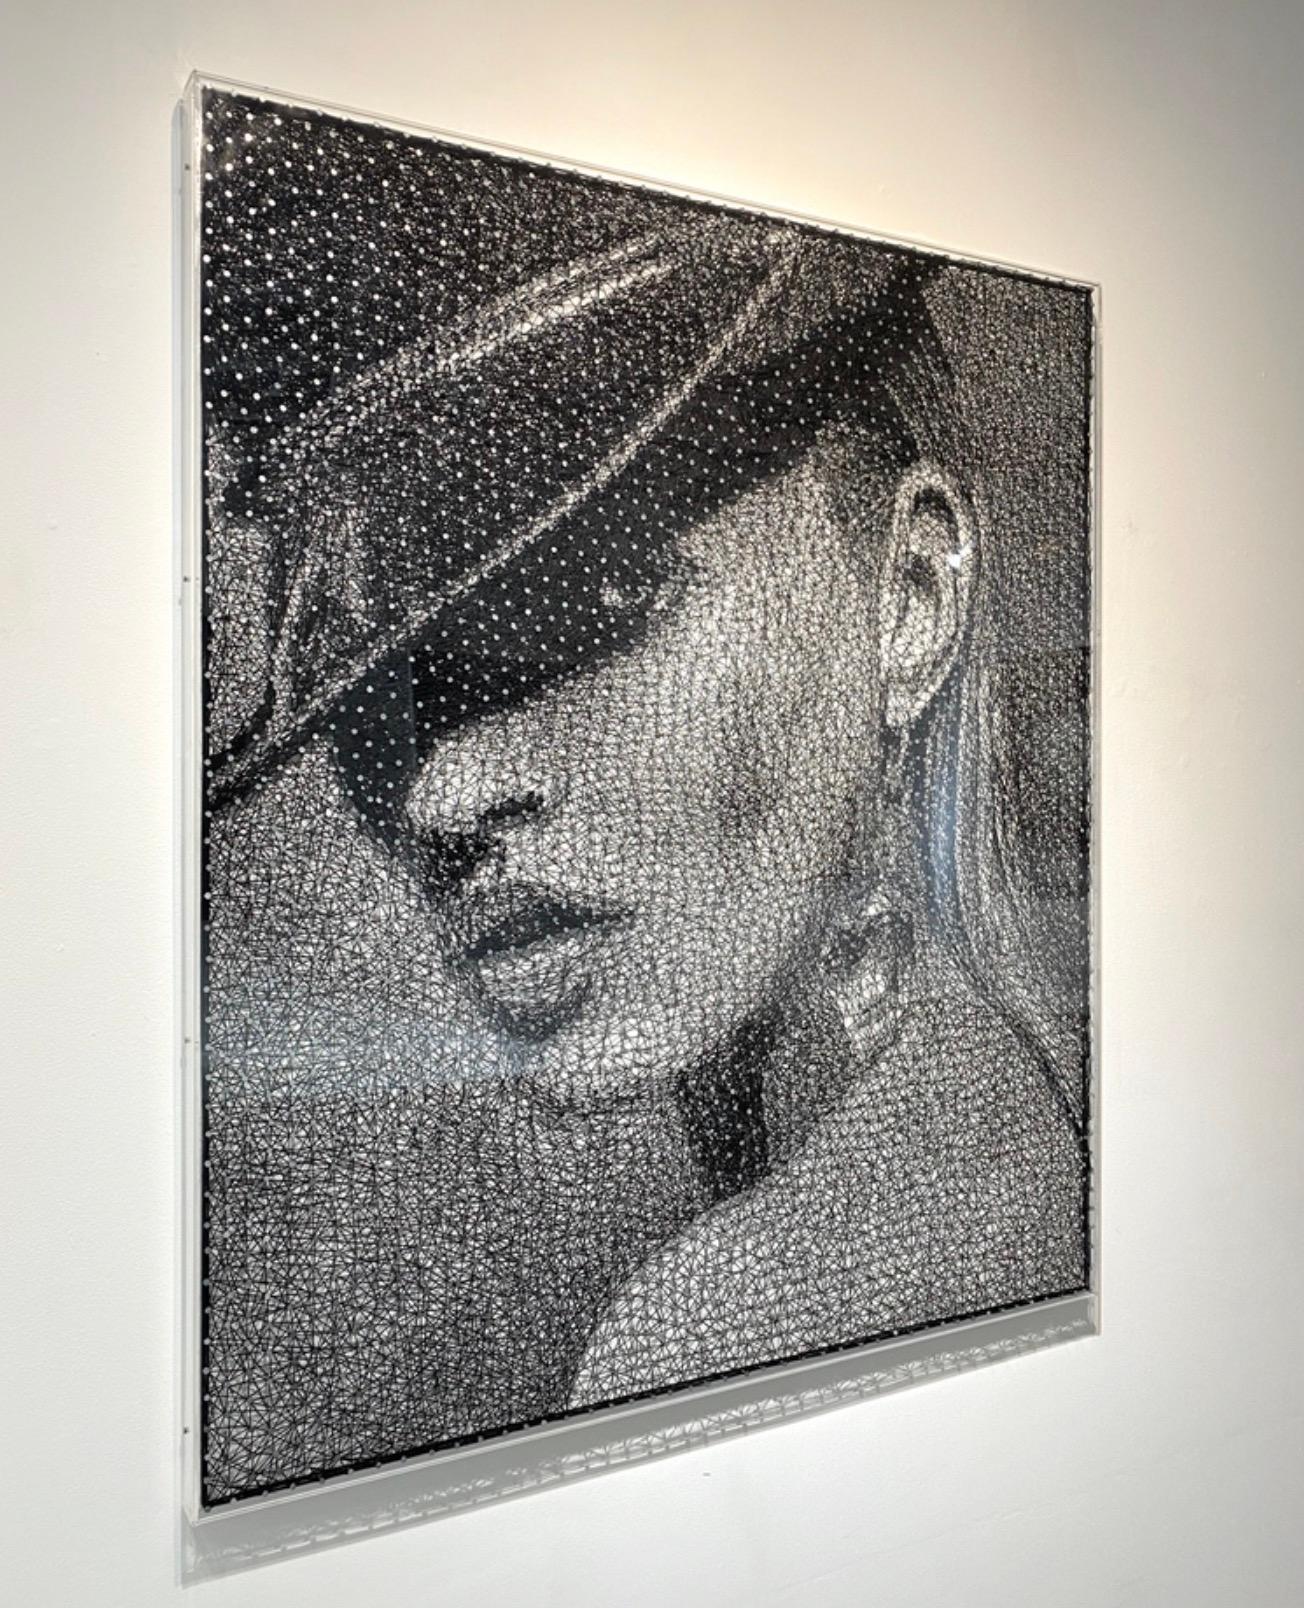 In the latest series, inspired by media, pop culture, and film Jantzen takes Neo-pointillism to the next level utilizing thousands collection of photography, cinematographic stills, and other collected material encapsulated in glass spheres; hiding